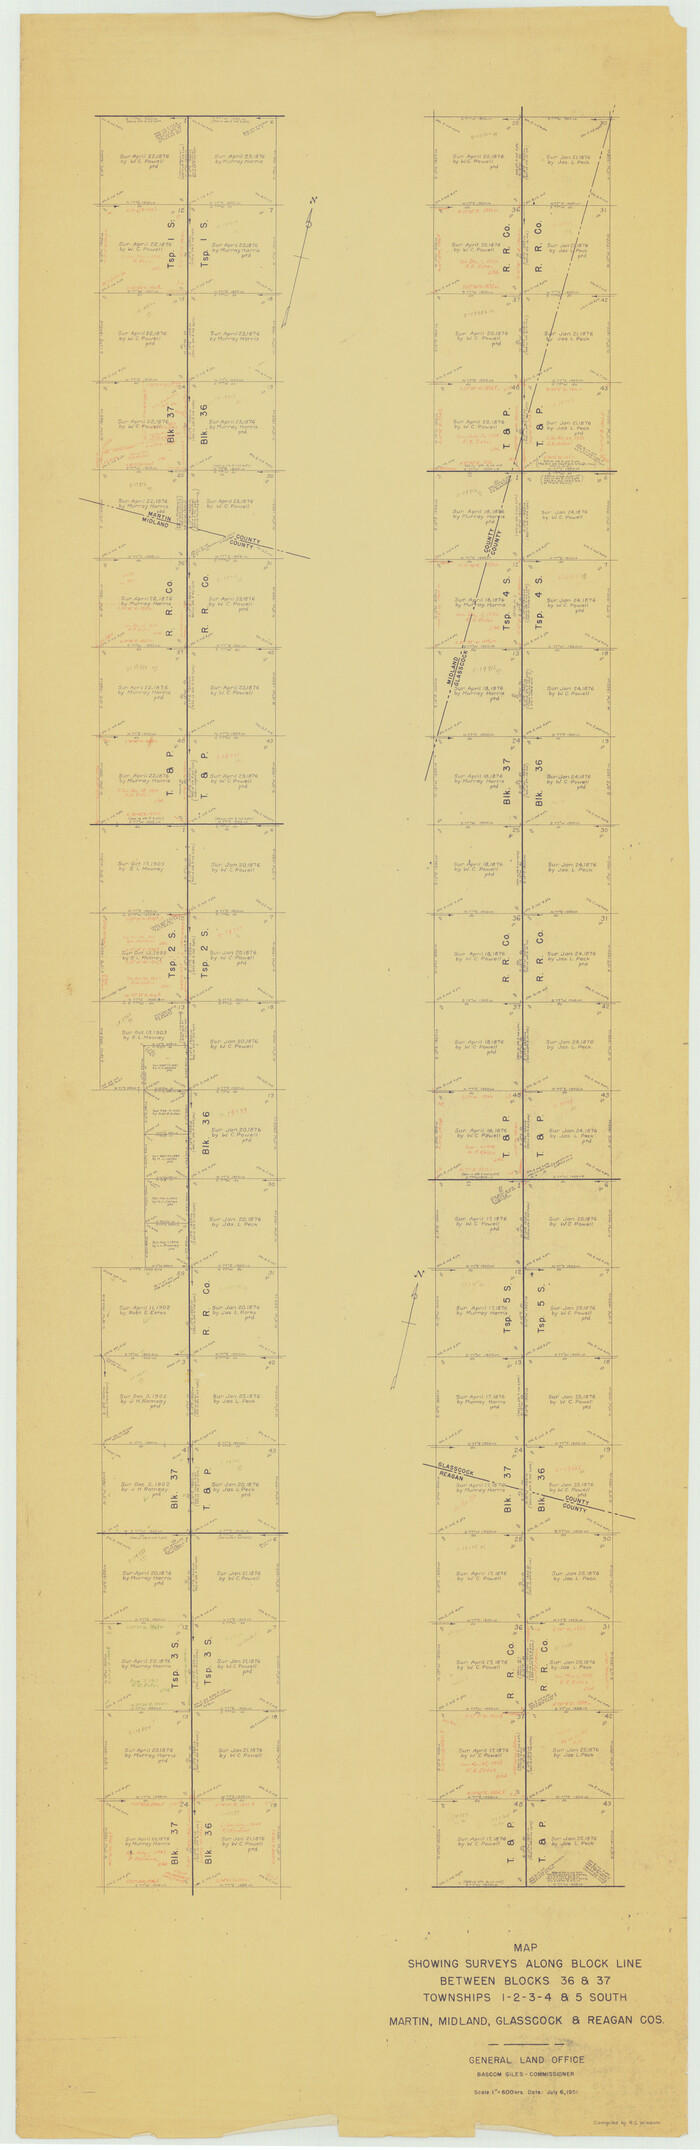 9519, Midland County Rolled Sketch 7, General Map Collection